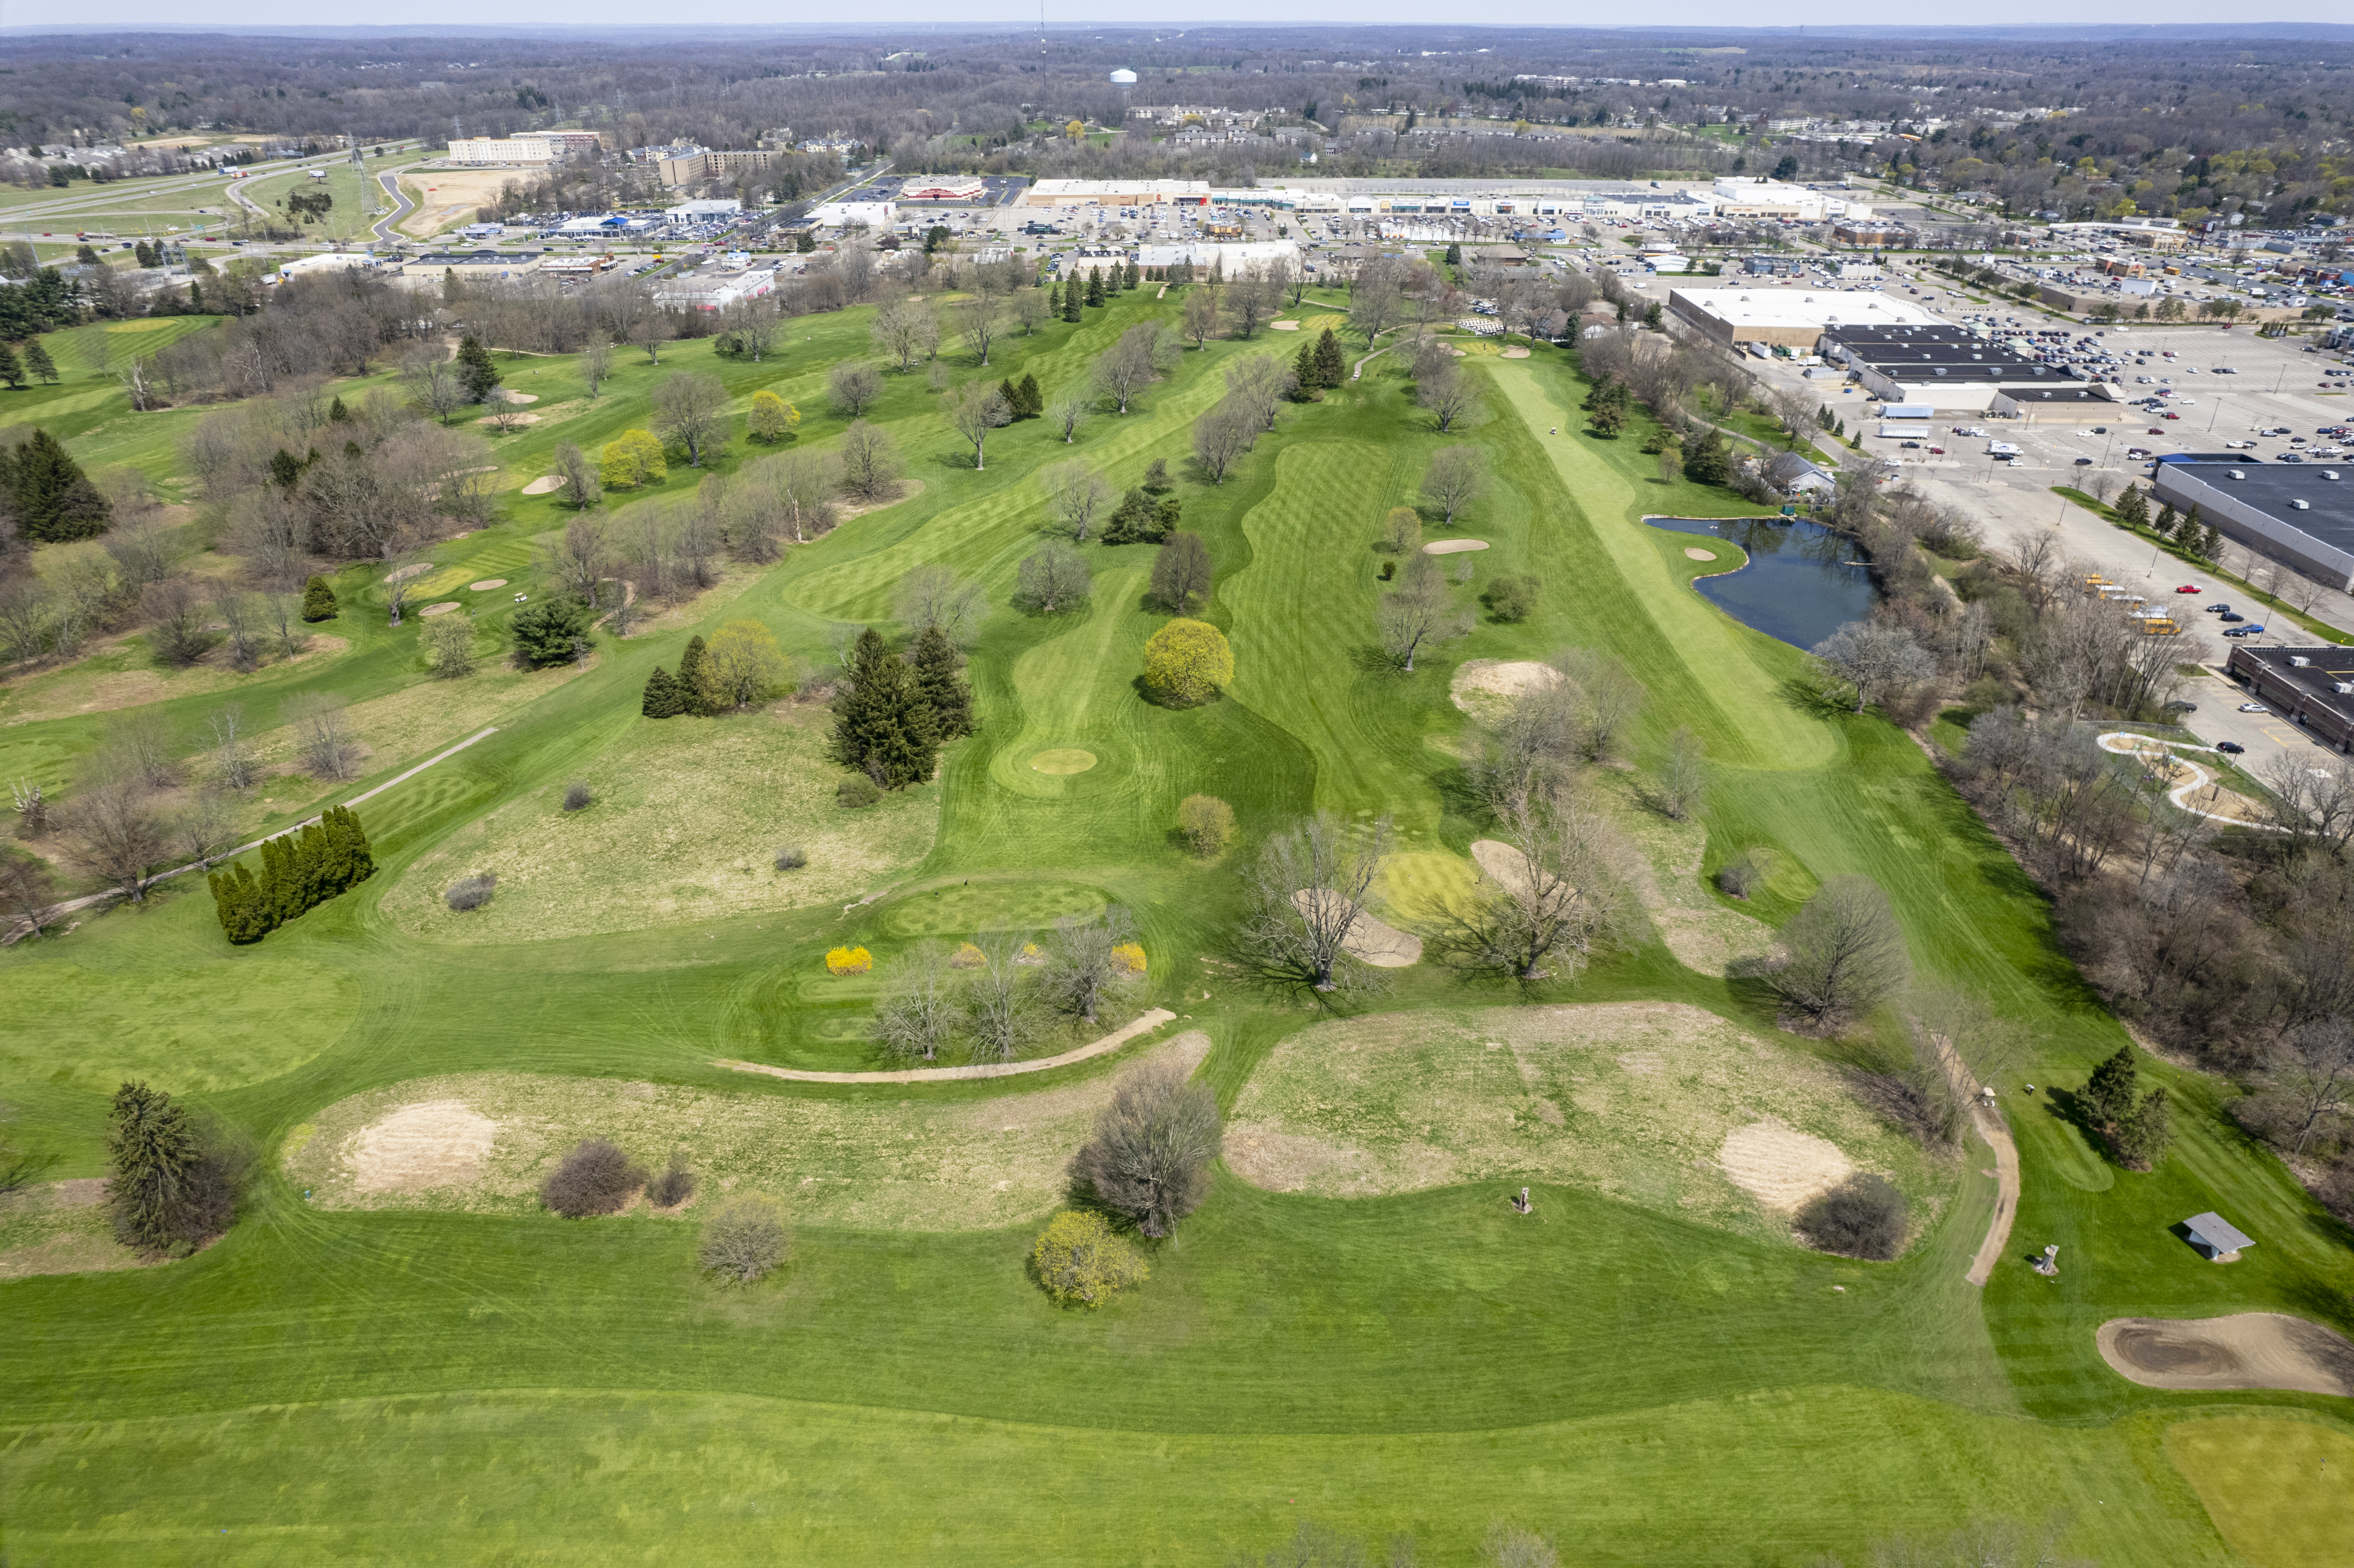 Kalamazoo Country Club plans for massive expansion, but residents